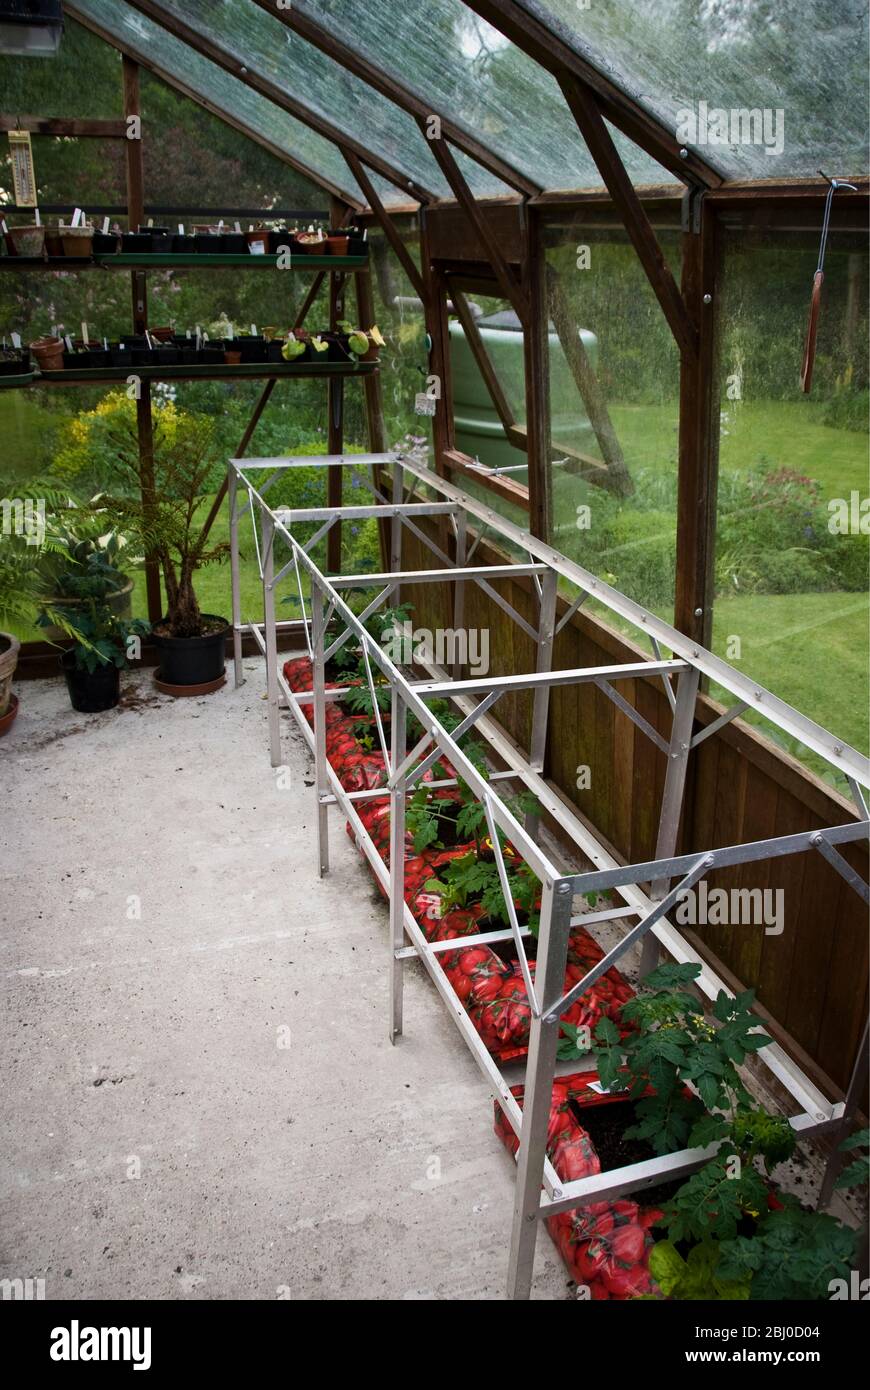 Interior of greenhouse with staging, seedlings and tomato plants - Stock Photo